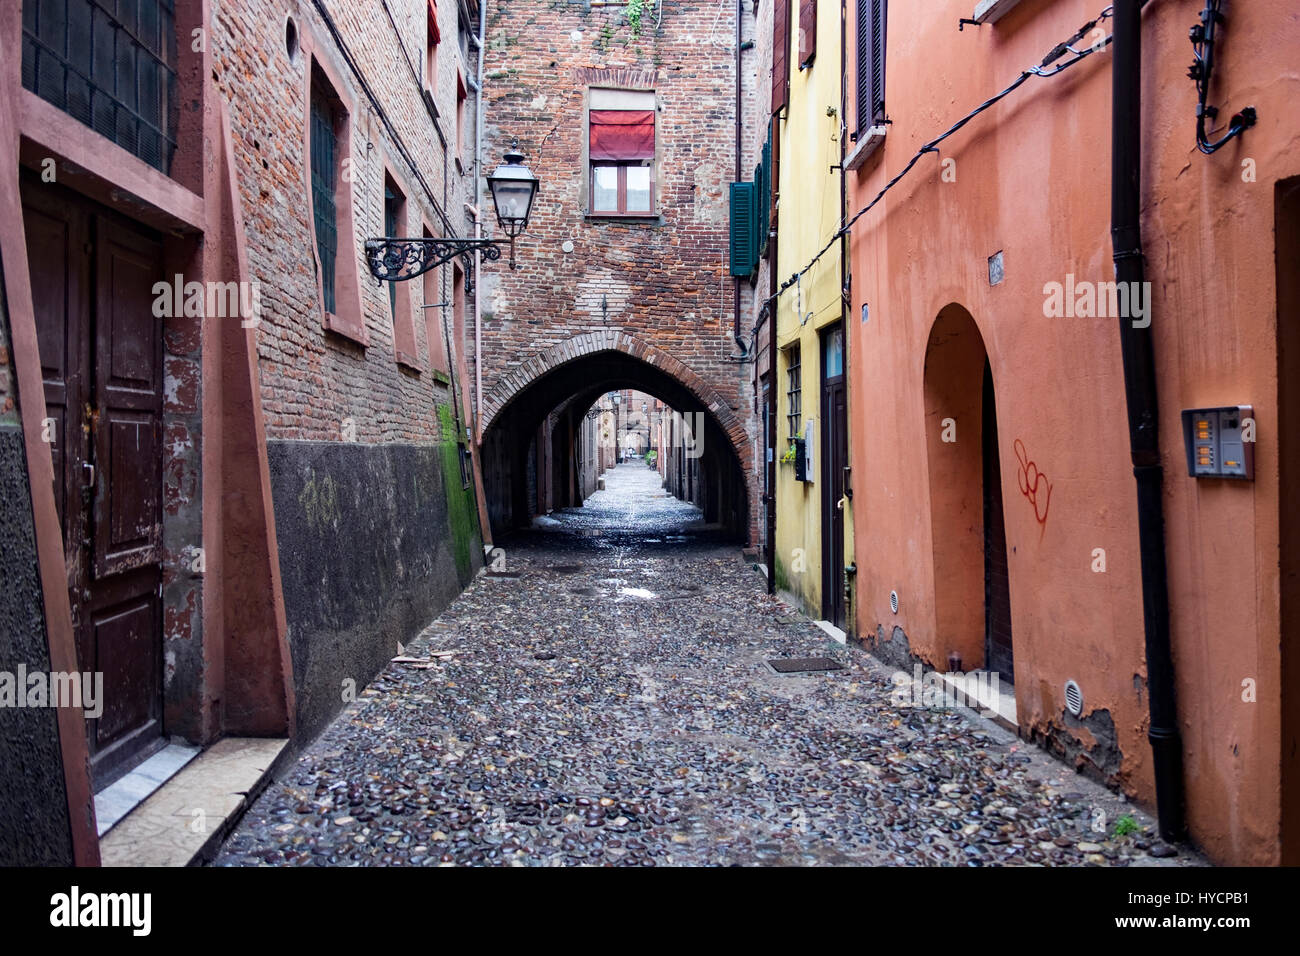 Archways and street scene of the medieval city of Ferrara, Italy Stock Photo